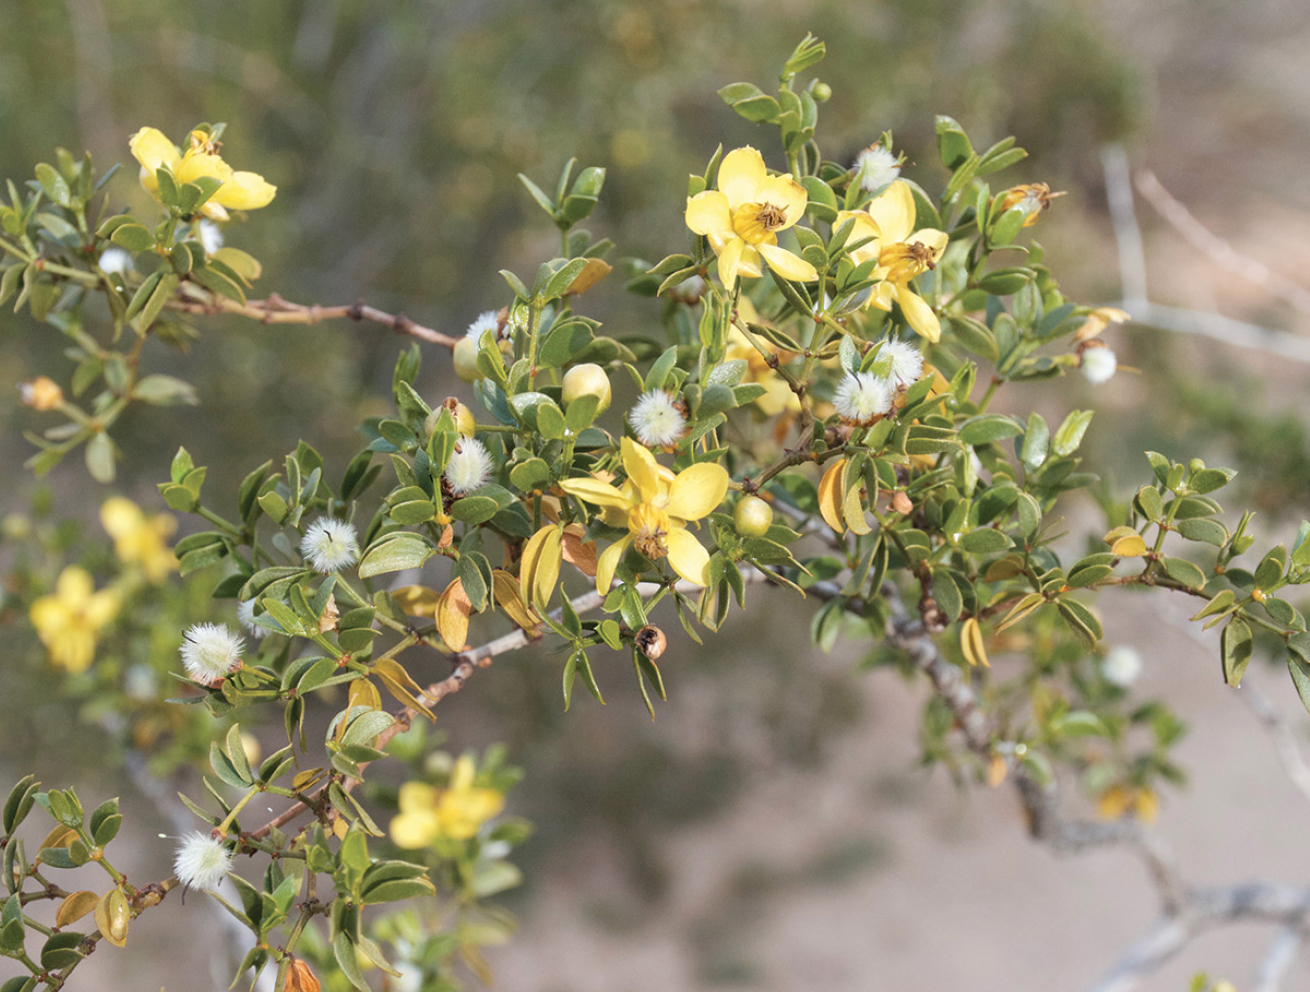 Creosote in bloom.